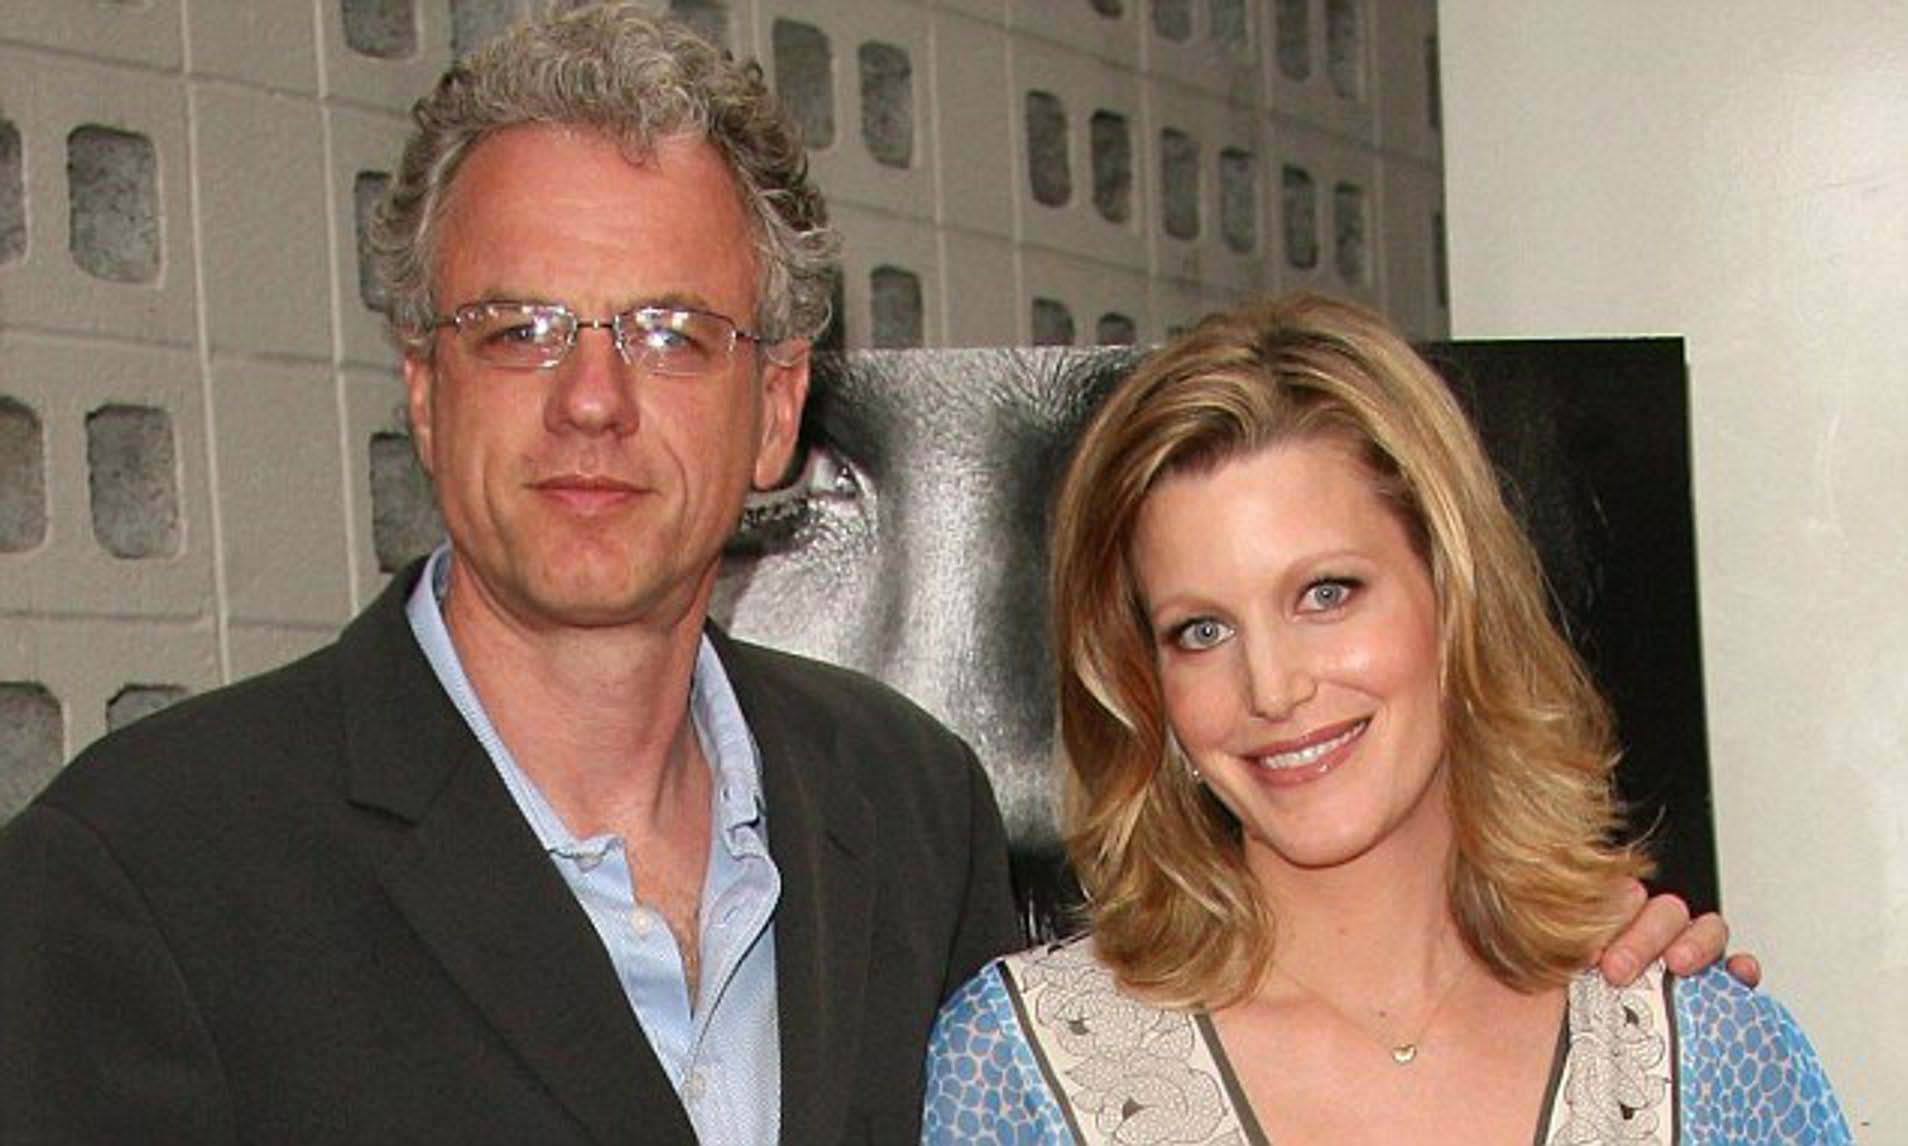 Anna Gunn-Professional Actress well-known for her rolein the series Breaking Bad as Skyler White